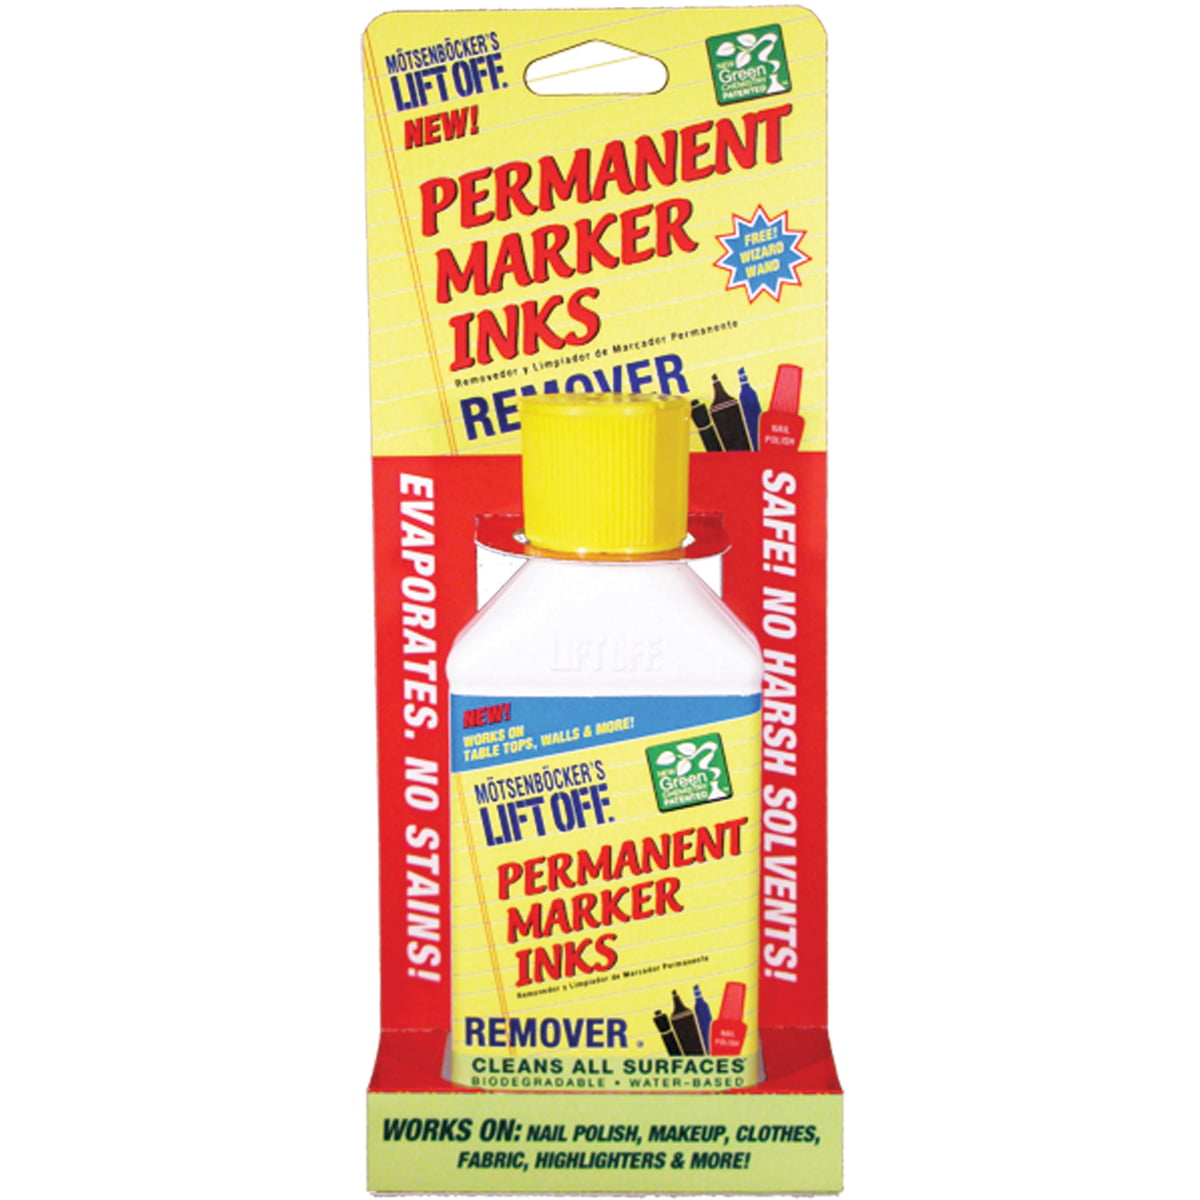 Lift Off Permanent Marker & Ink Remover-4.5oz